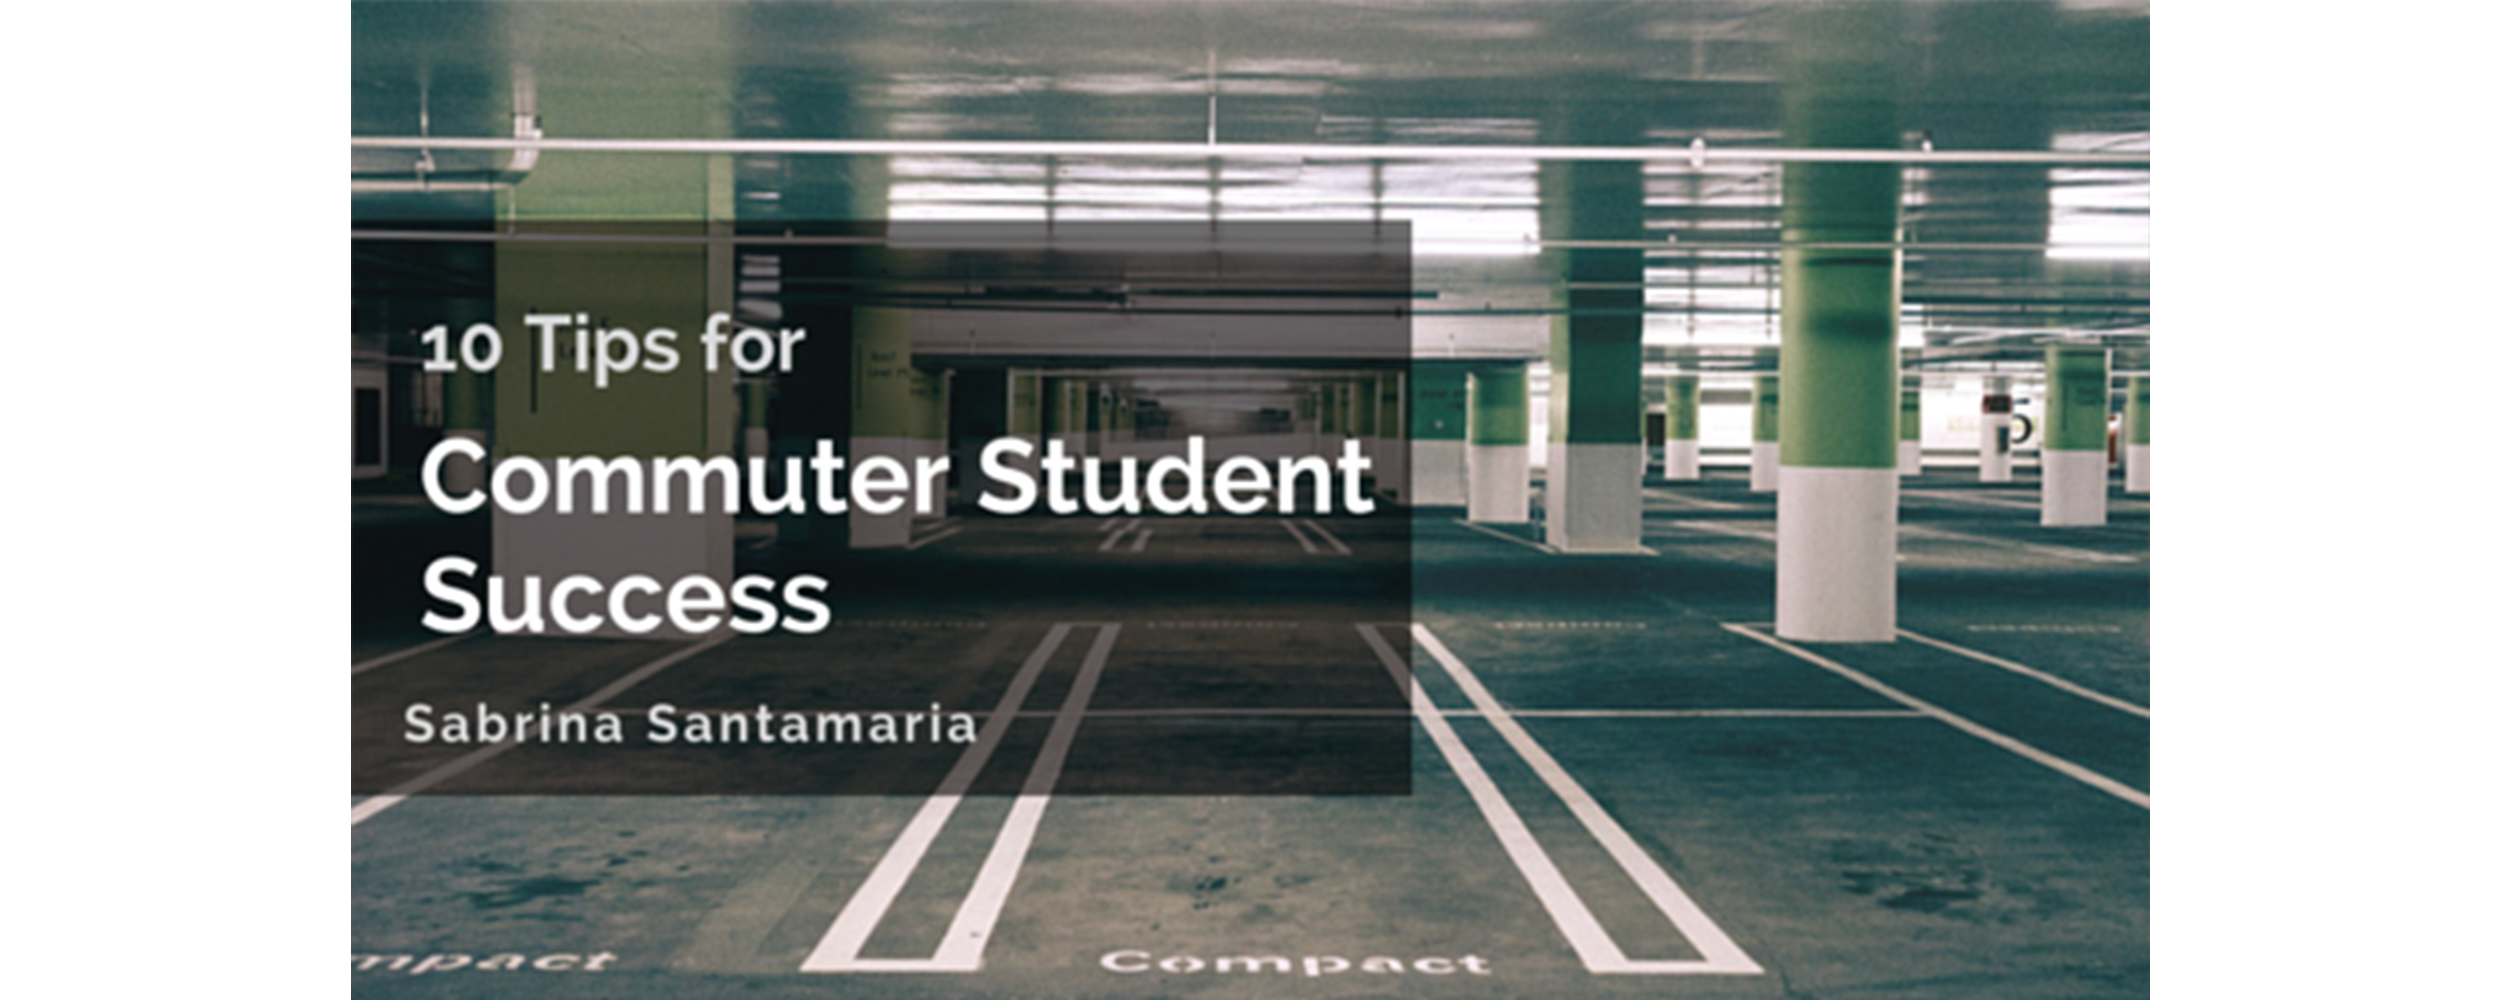 10 Tips for Commuter Student Success